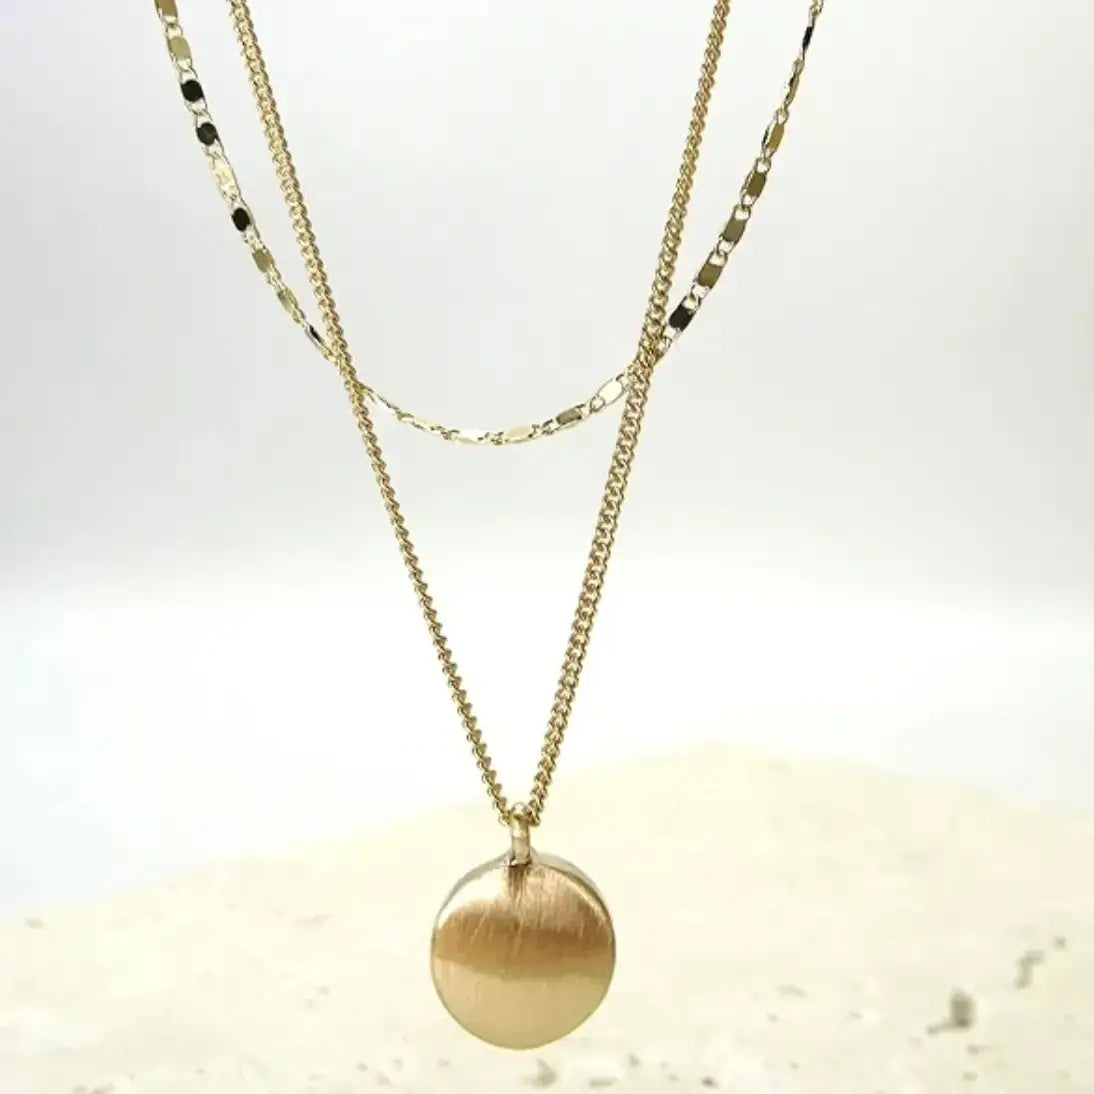 Hannah Multi Chain and Disc Necklace by JOSS+LYN KiKi's Mercato